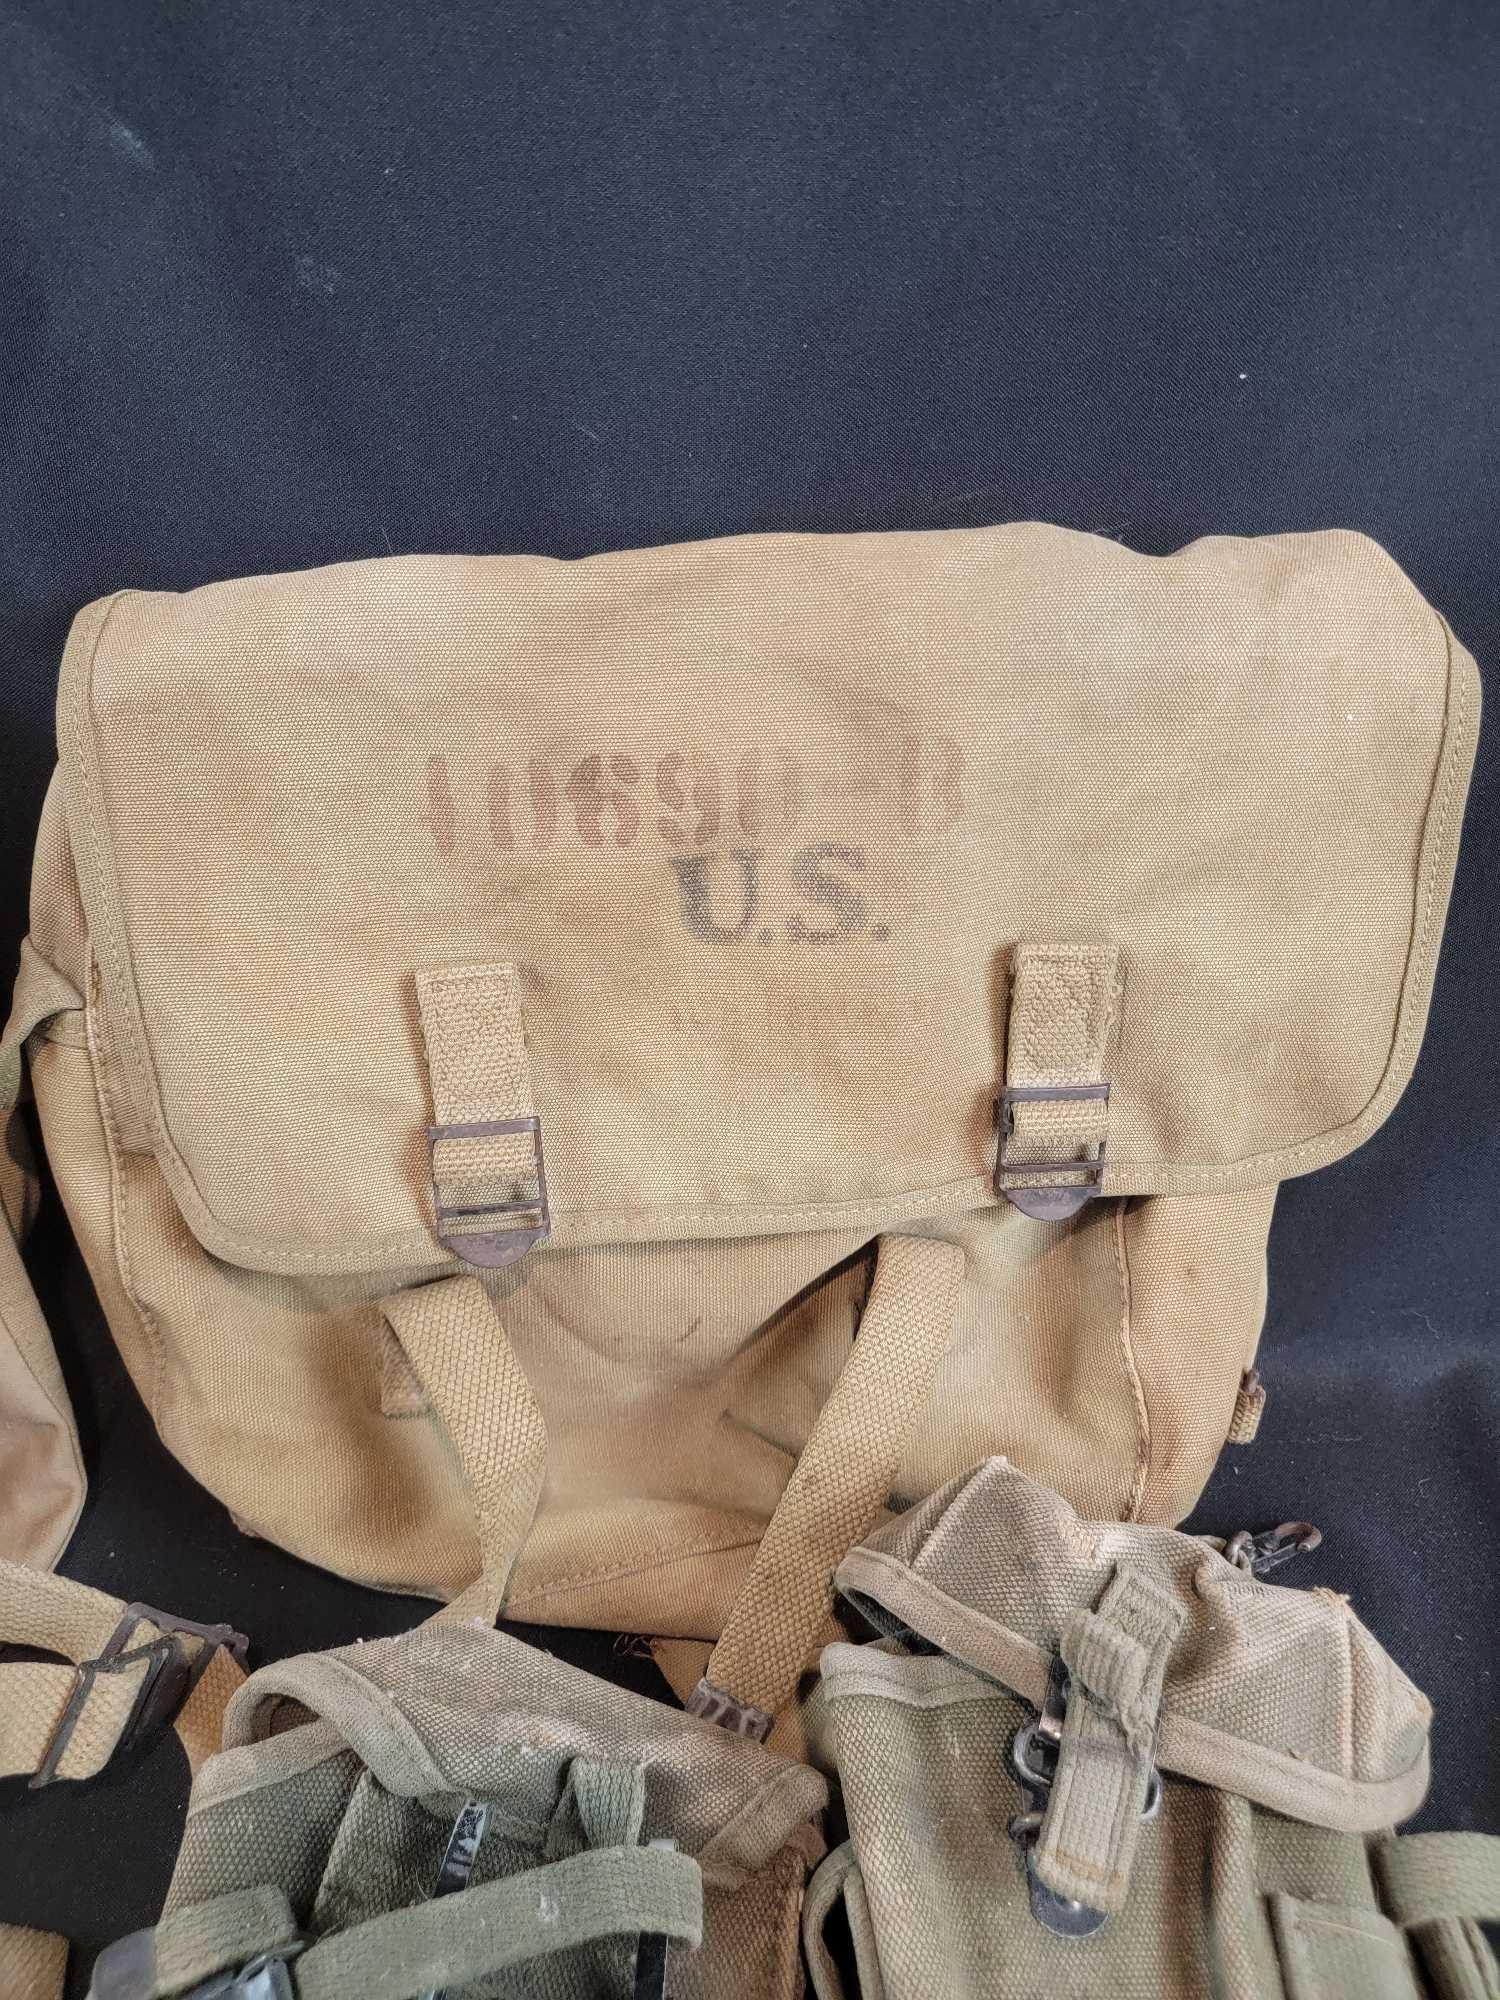 Large Group US Military canvas bags ammo belt canteen mess kit mixed wars WWI WWII WW2